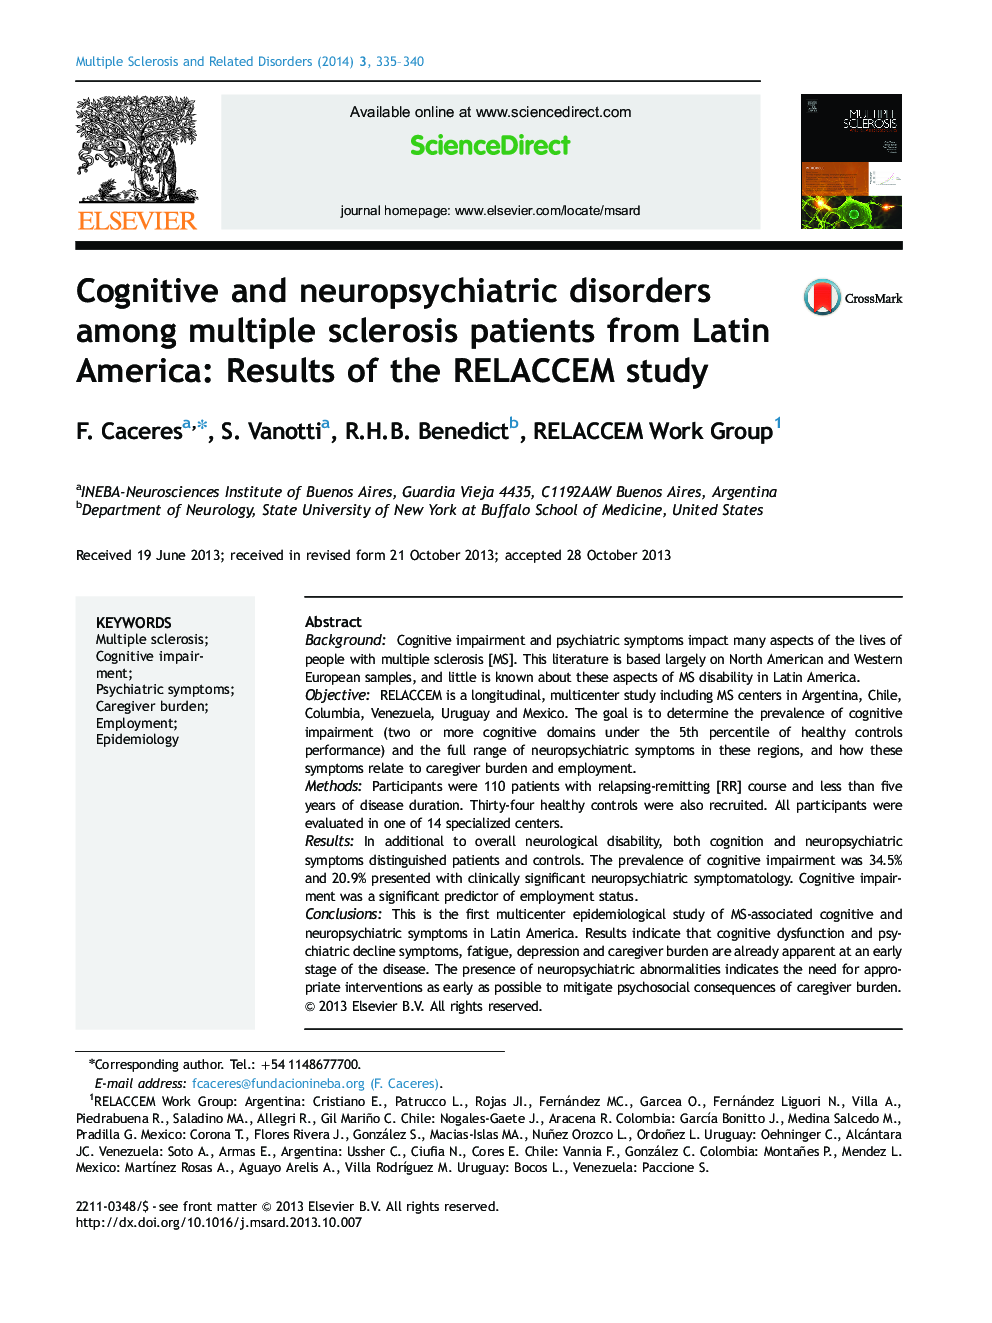 Cognitive and neuropsychiatric disorders among multiple sclerosis patients from Latin America: Results of the RELACCEM study